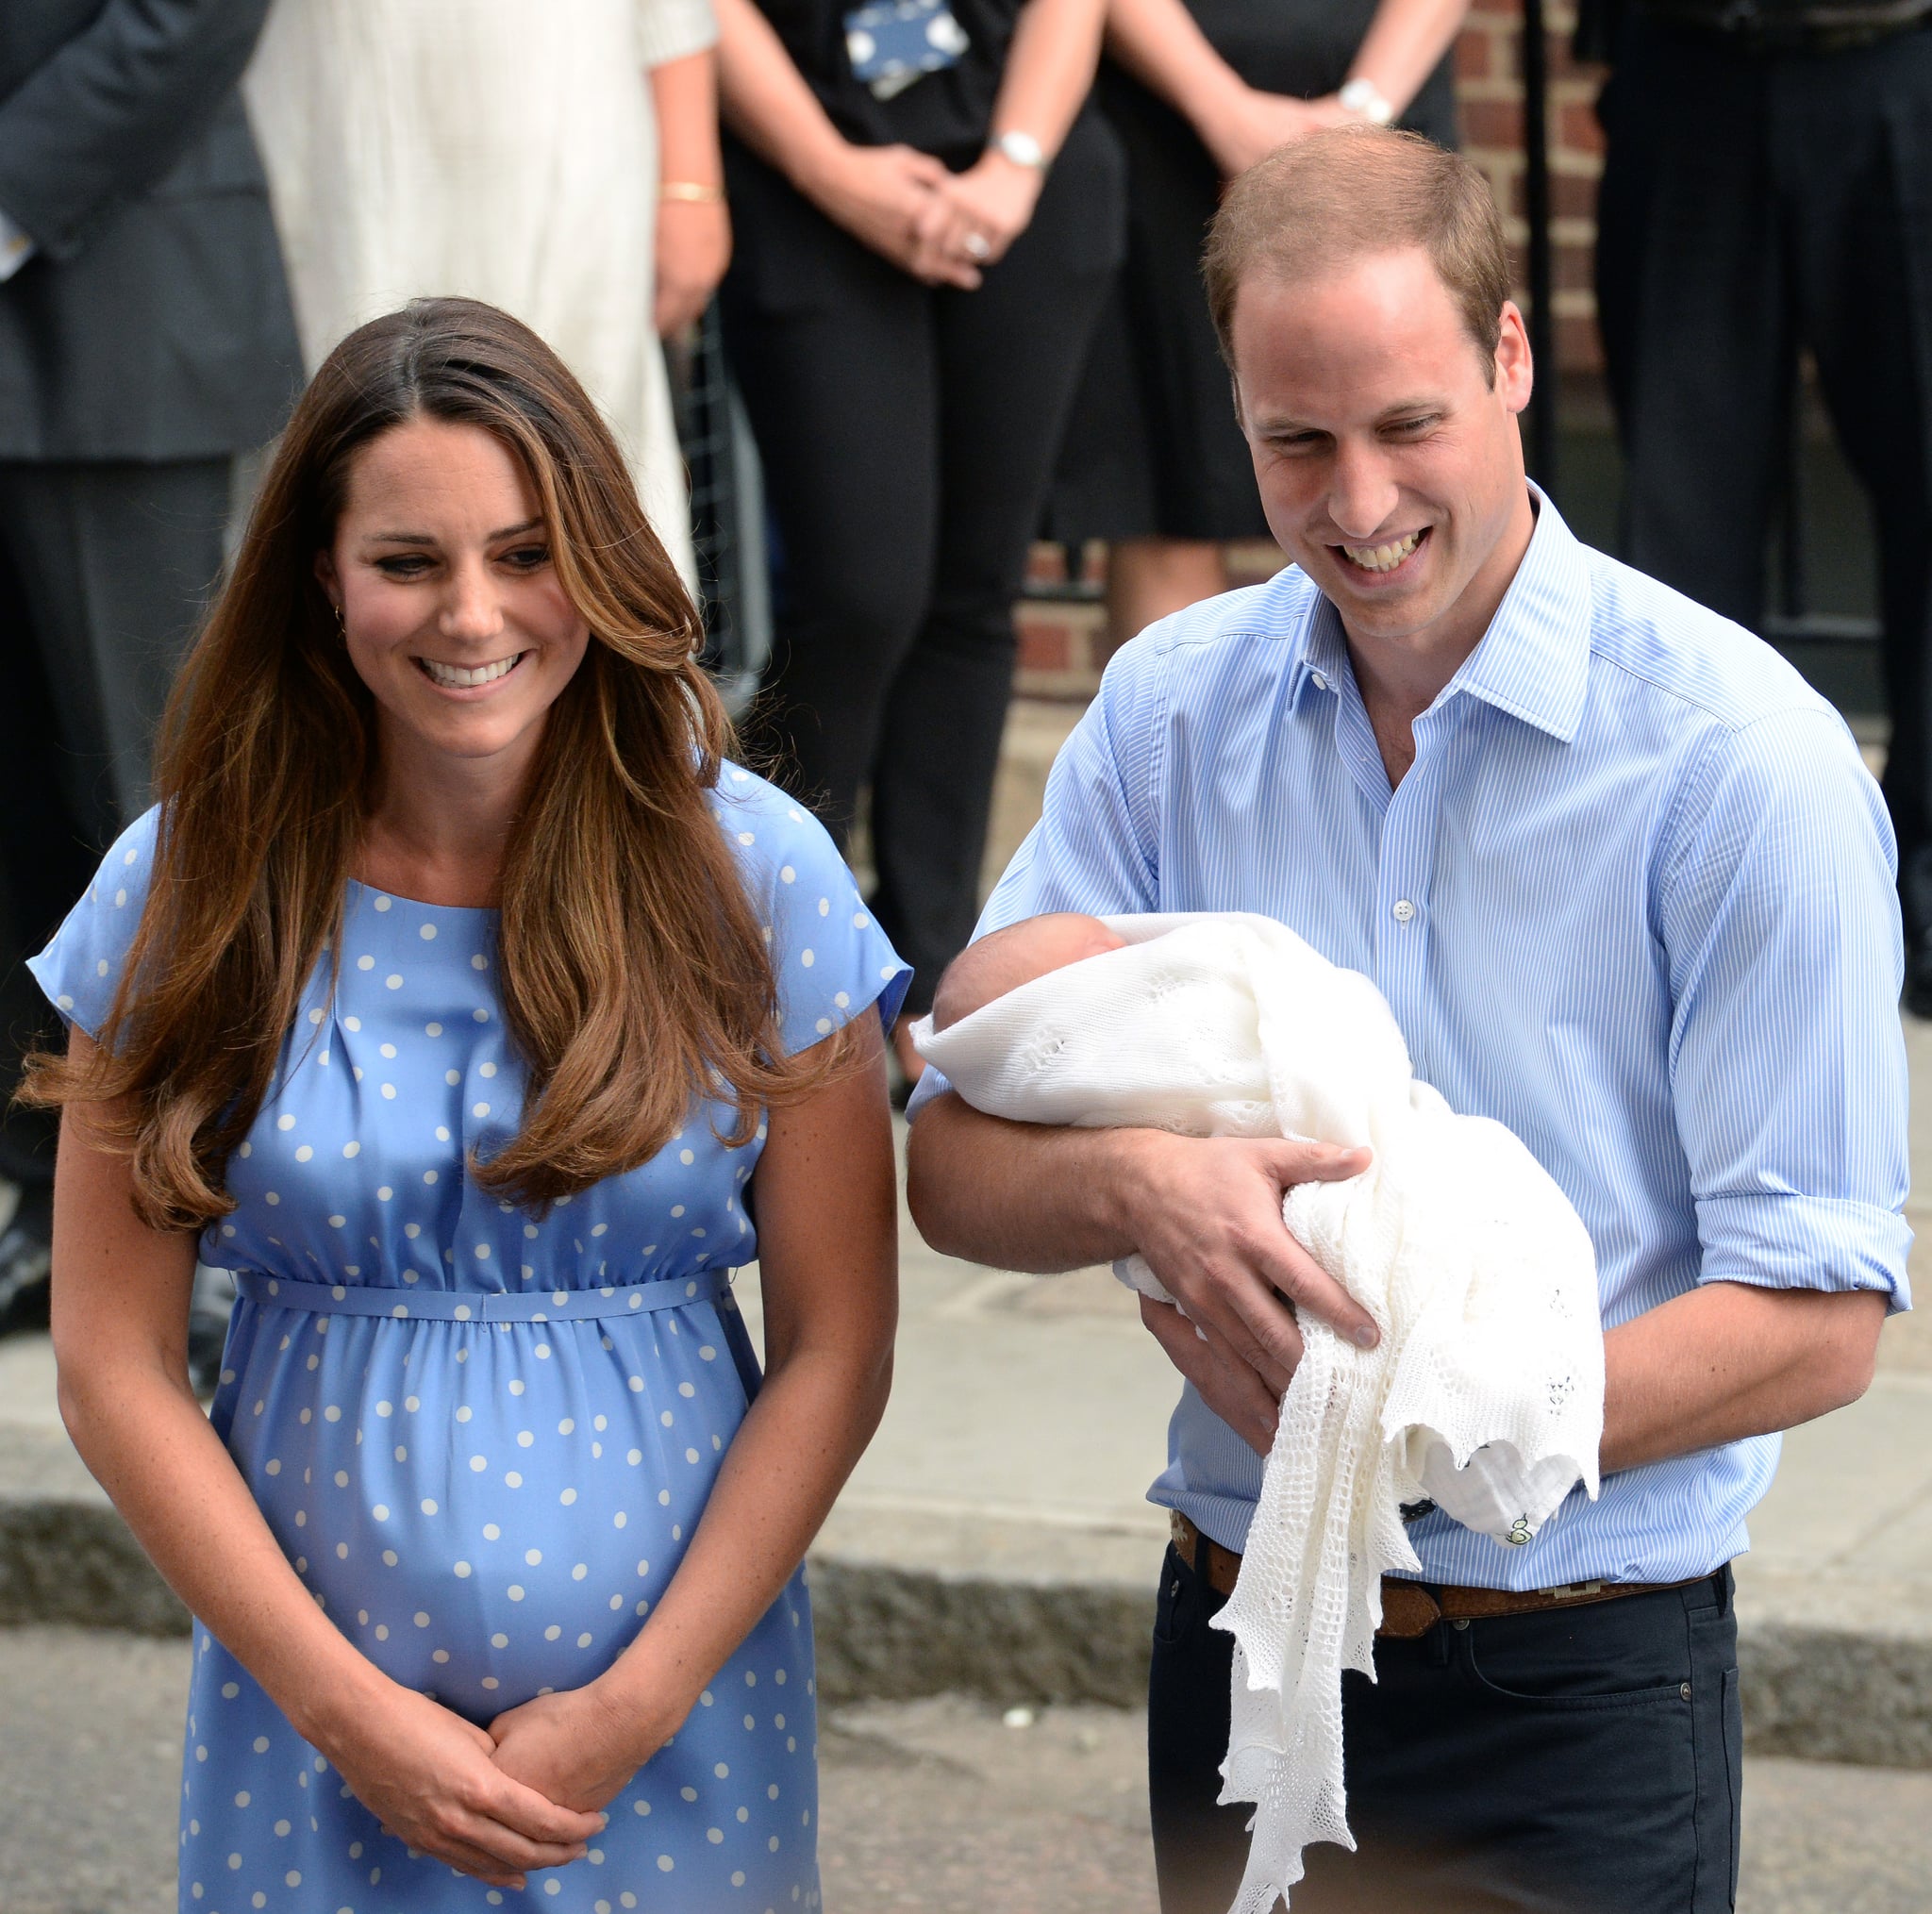 LONDON, UNITED KINGDOM - JULY 23: Catherine, Duchess of Cambridge and Prince William, Duke of Cambridge leave the Lindo Wing of St. Mary's hospital with their newborn son on July 23, 2013 in London, England. (Photo by Anwar Hussein/WireImage)